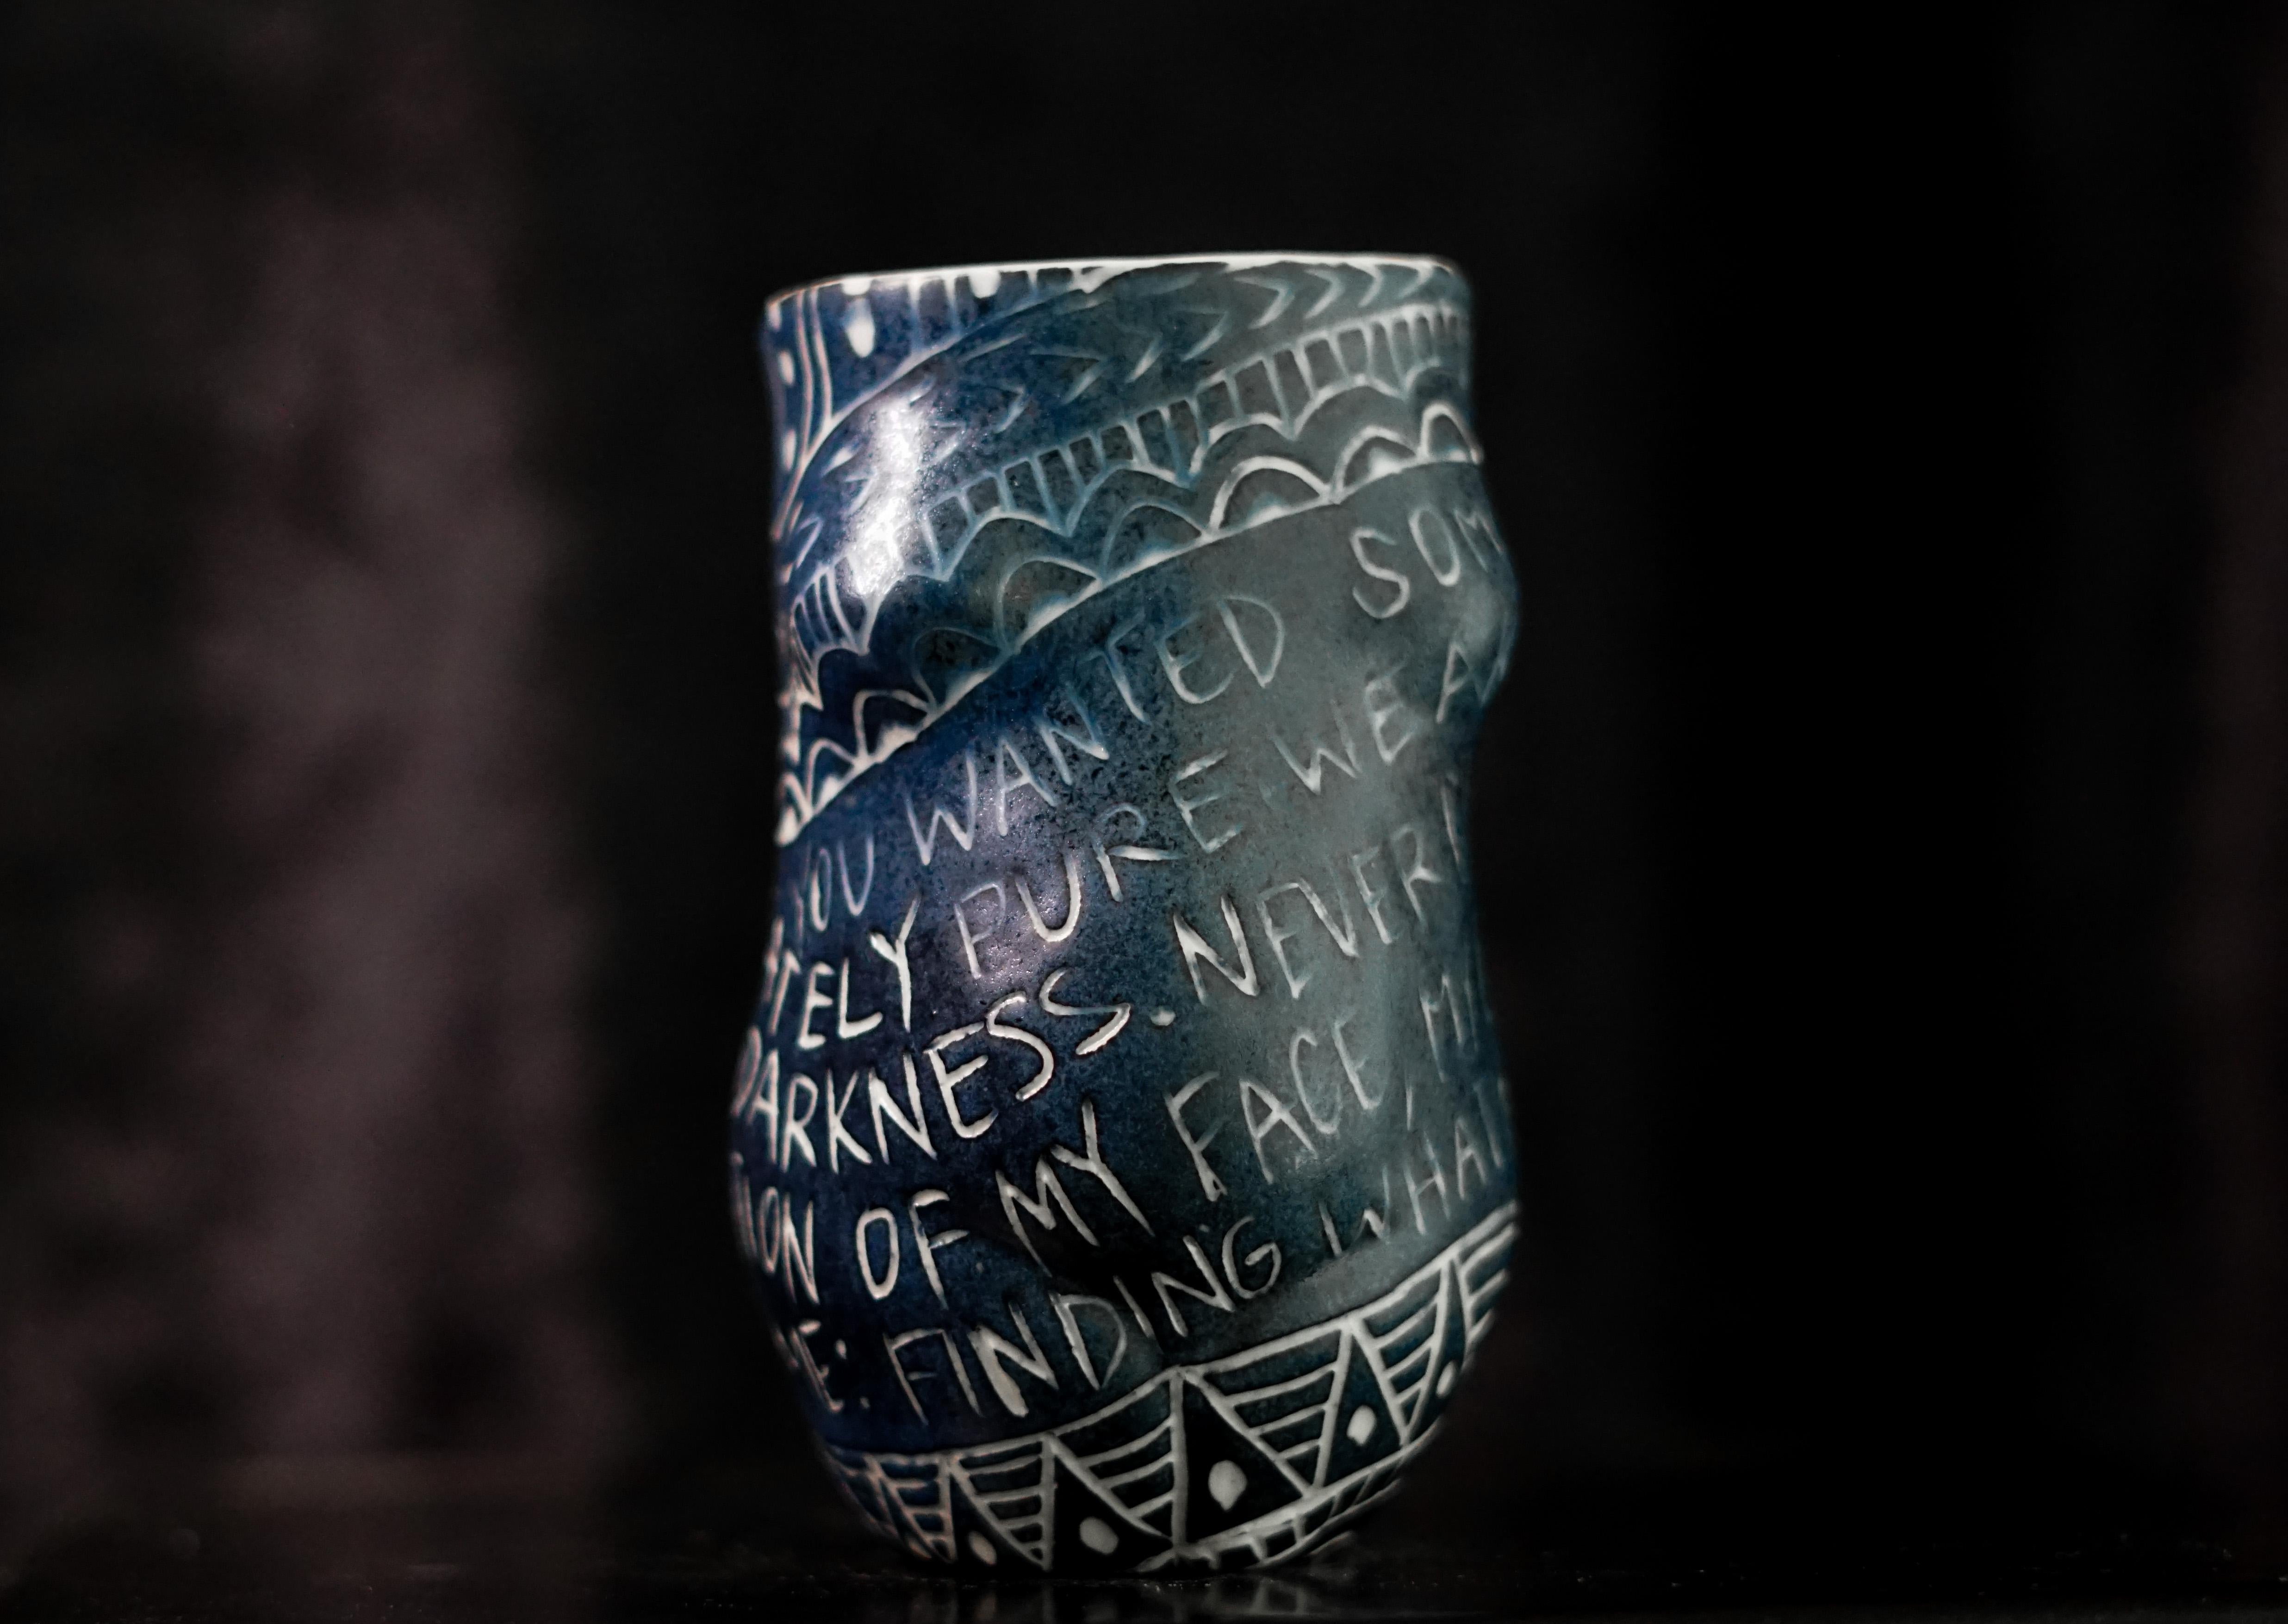 “You Wanted Something...” Porcelain cup with sgraffito detailing by the artist - Sculpture by Alex Hodge